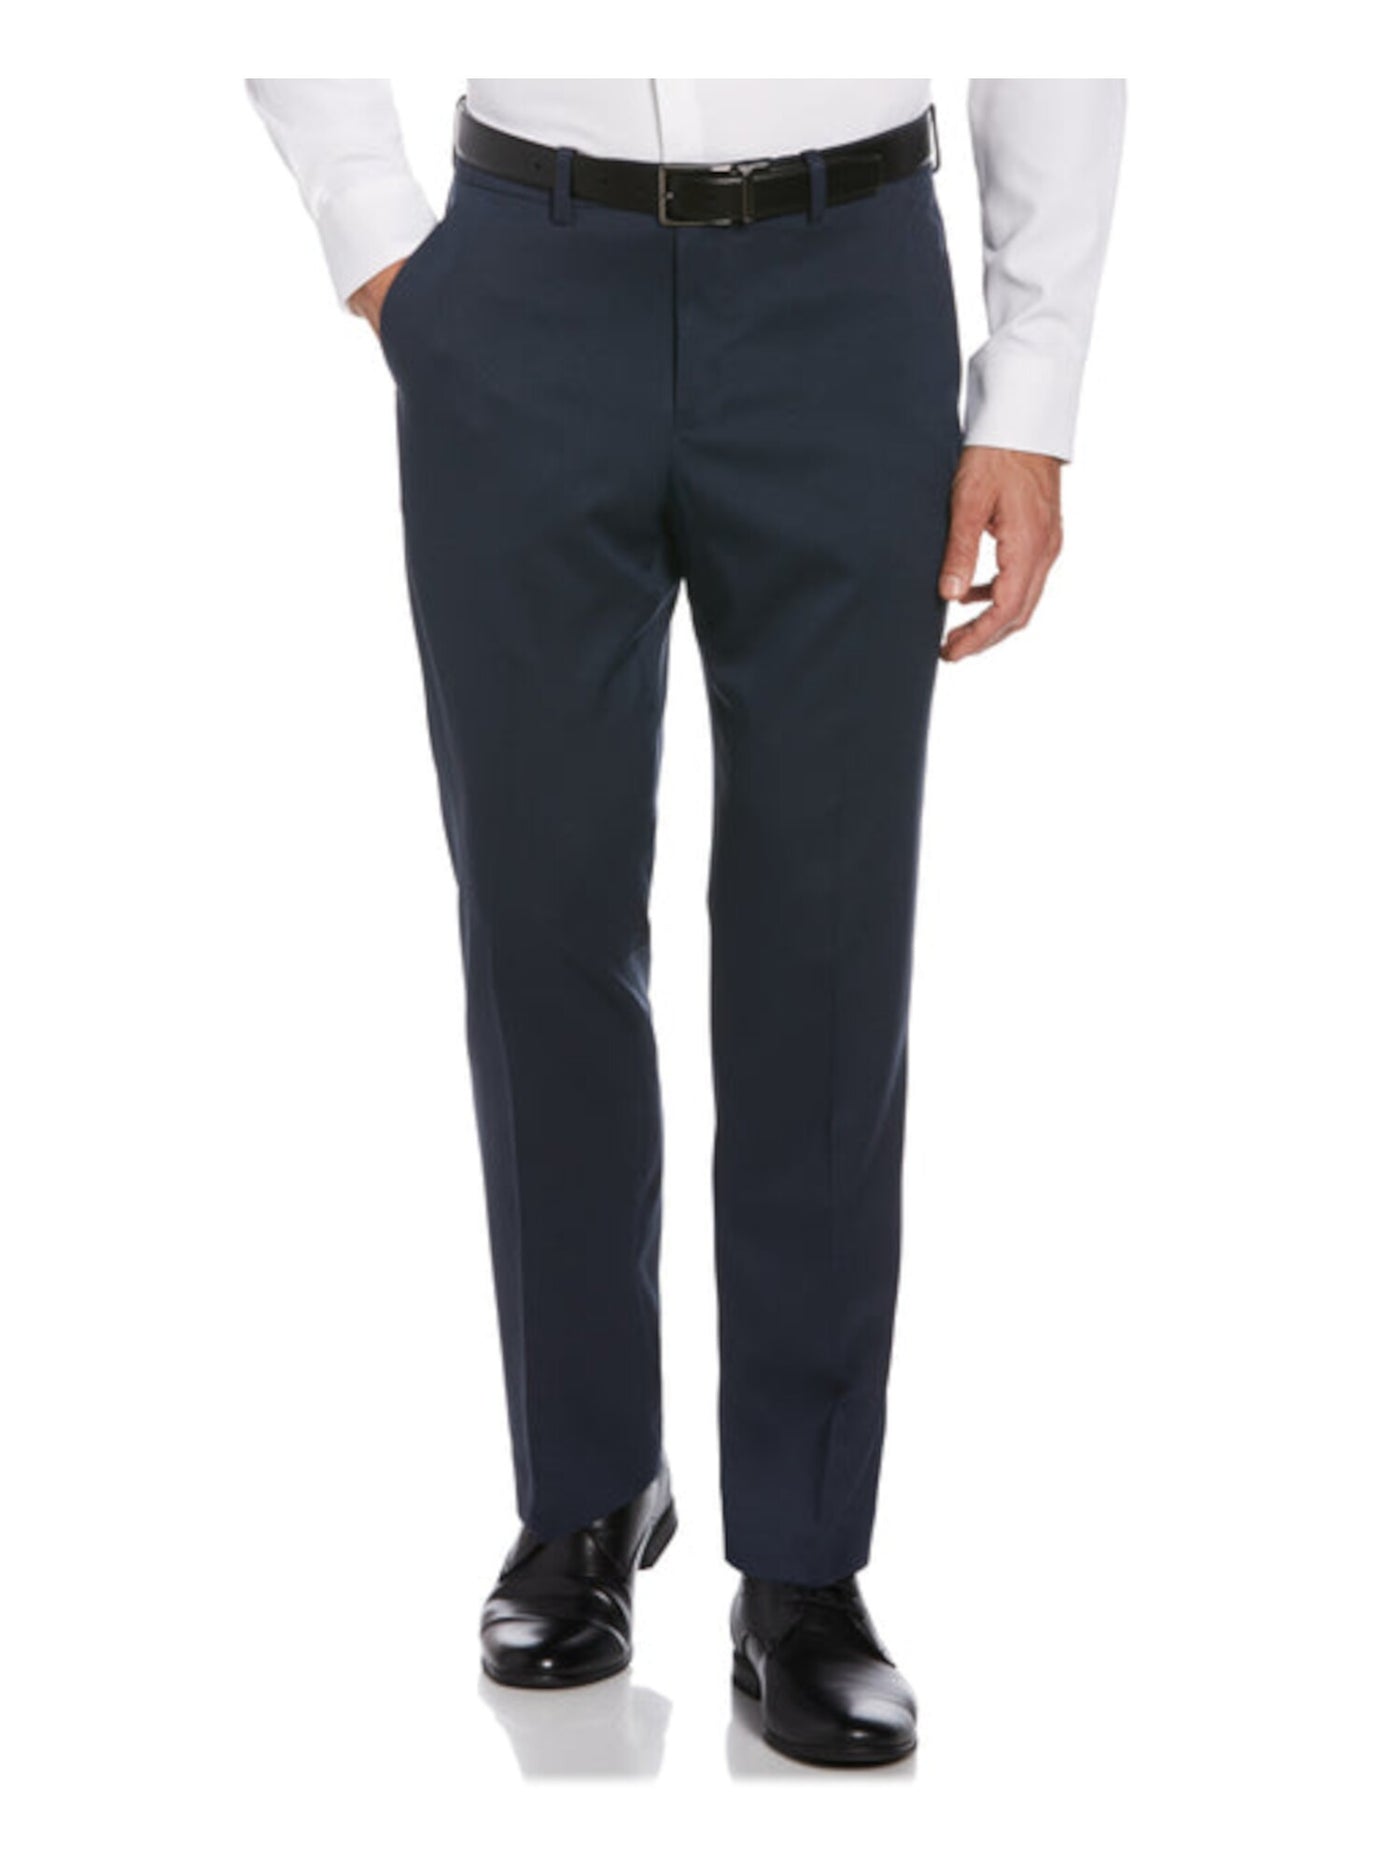 PERRY ELLIS PORTFOLIO Mens Navy Flat Front, Tapered, Patterned Classic Fit Performance Stretch Pants W29\L32